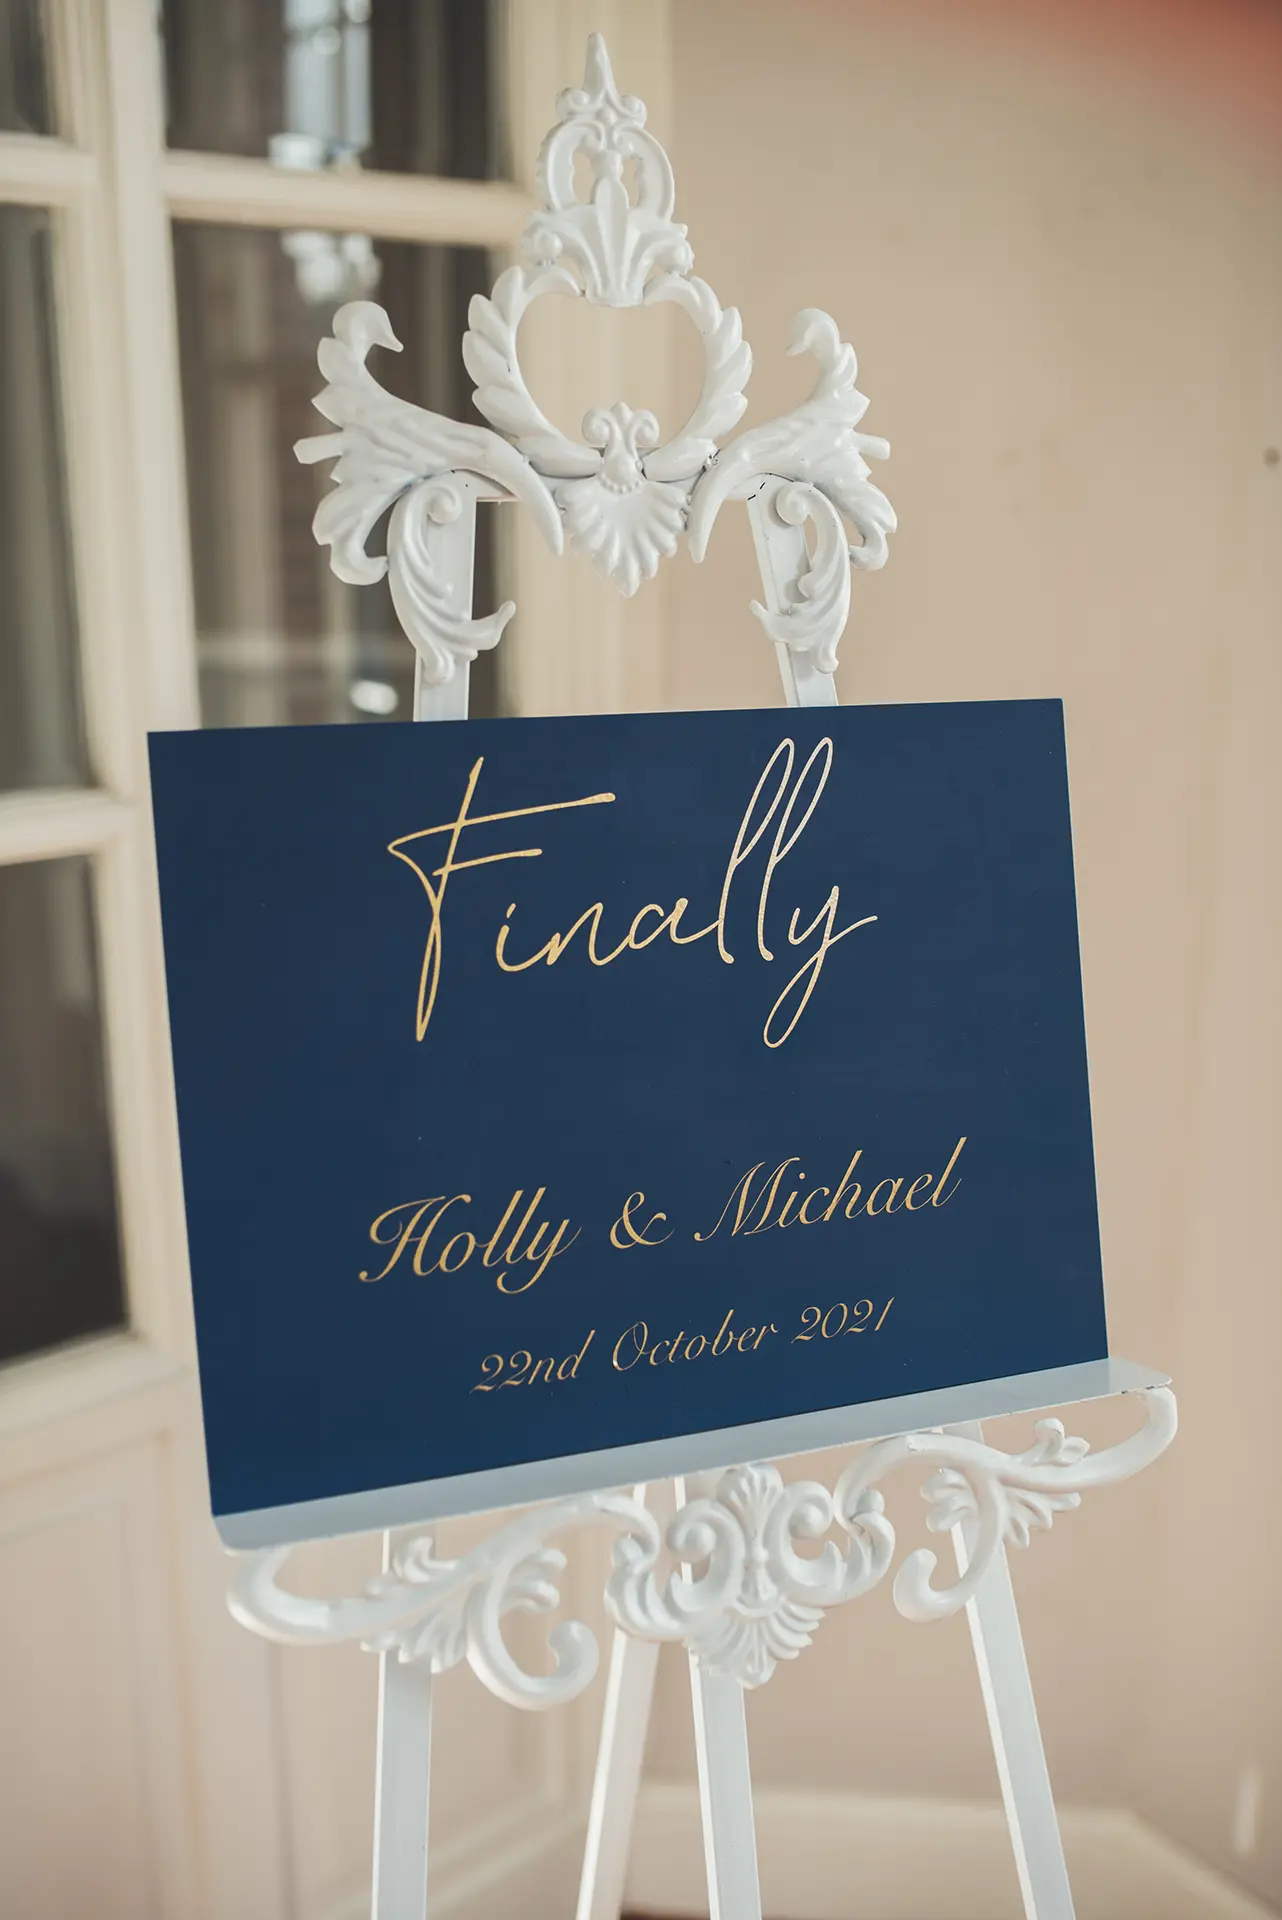 Old Palace Chester wedding welcome sign